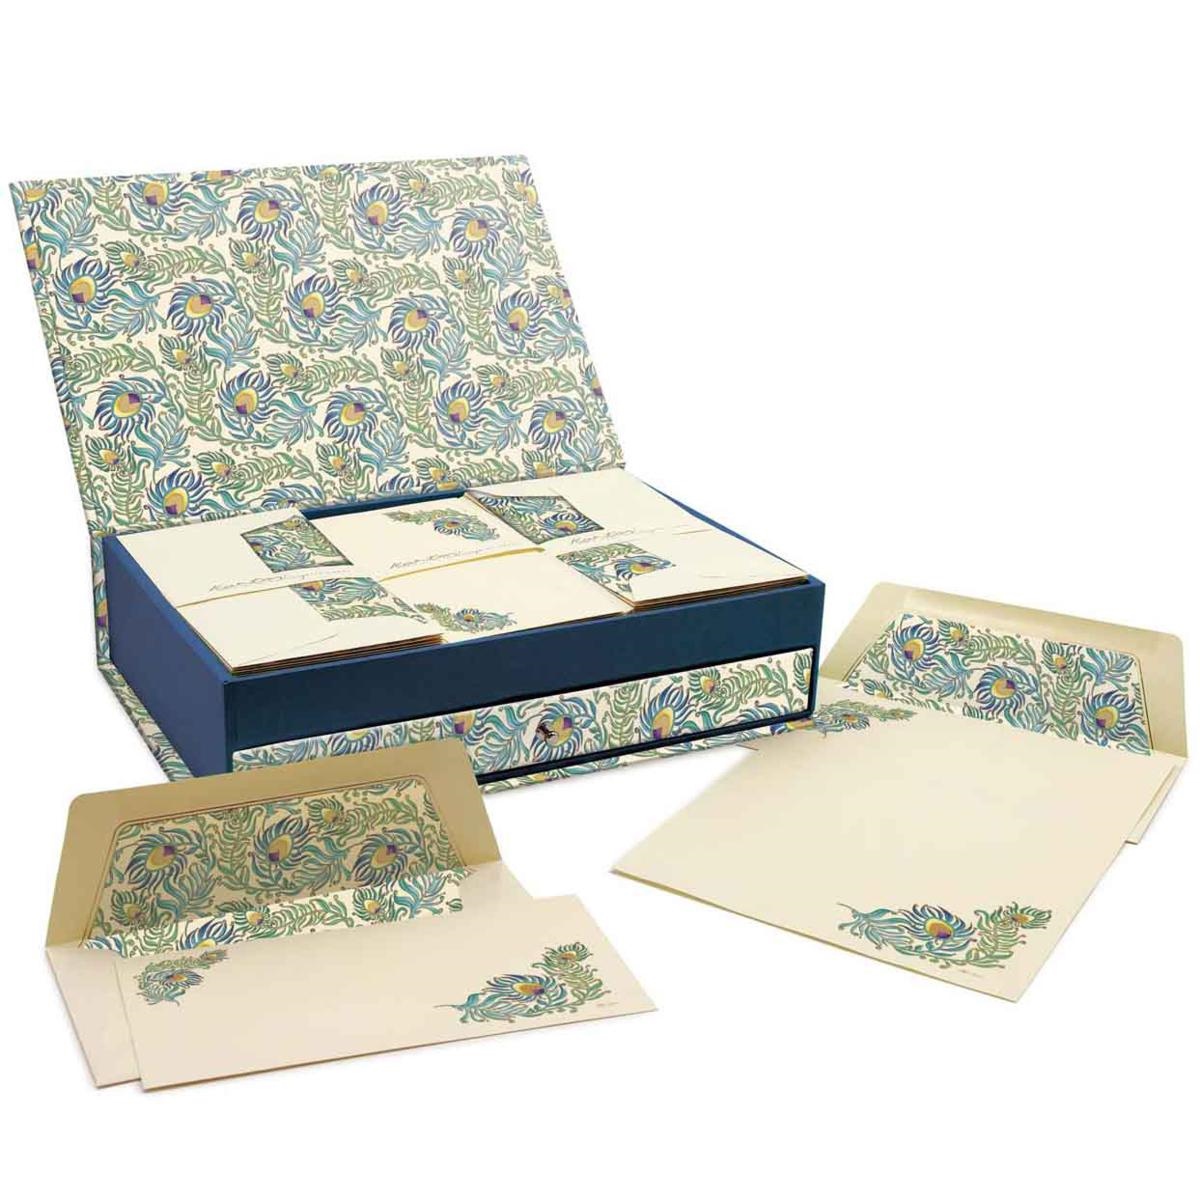 Classic Florentine Note Cards | Rossi 1931 Italian Stationery